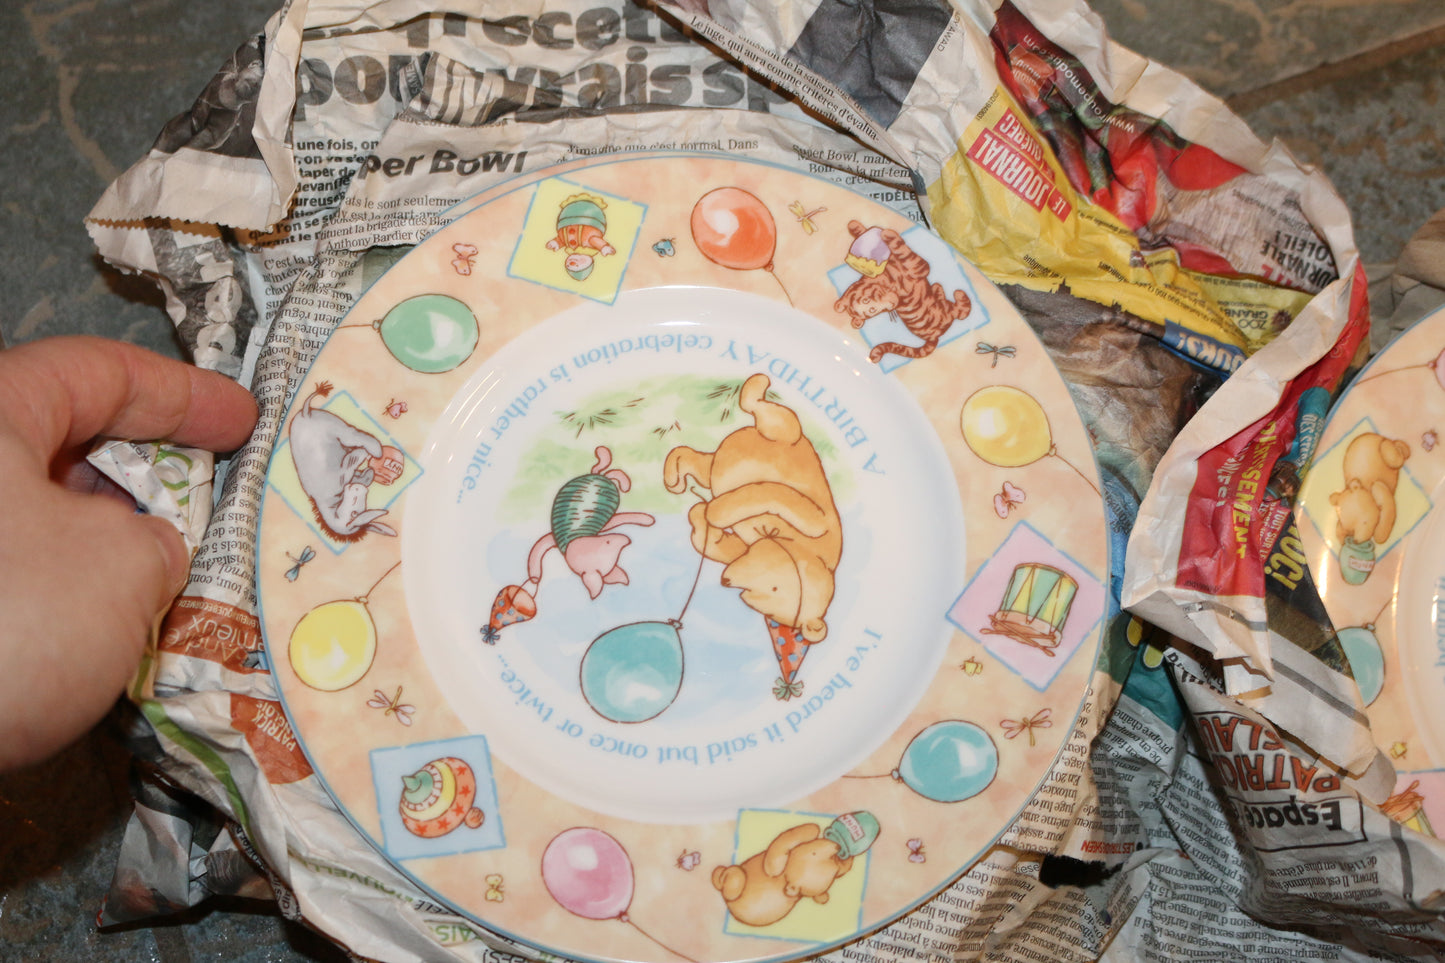 Lot Of 5 Royal Doulton 2001 Disney Winnie The Pooh Birthday Collection Plate